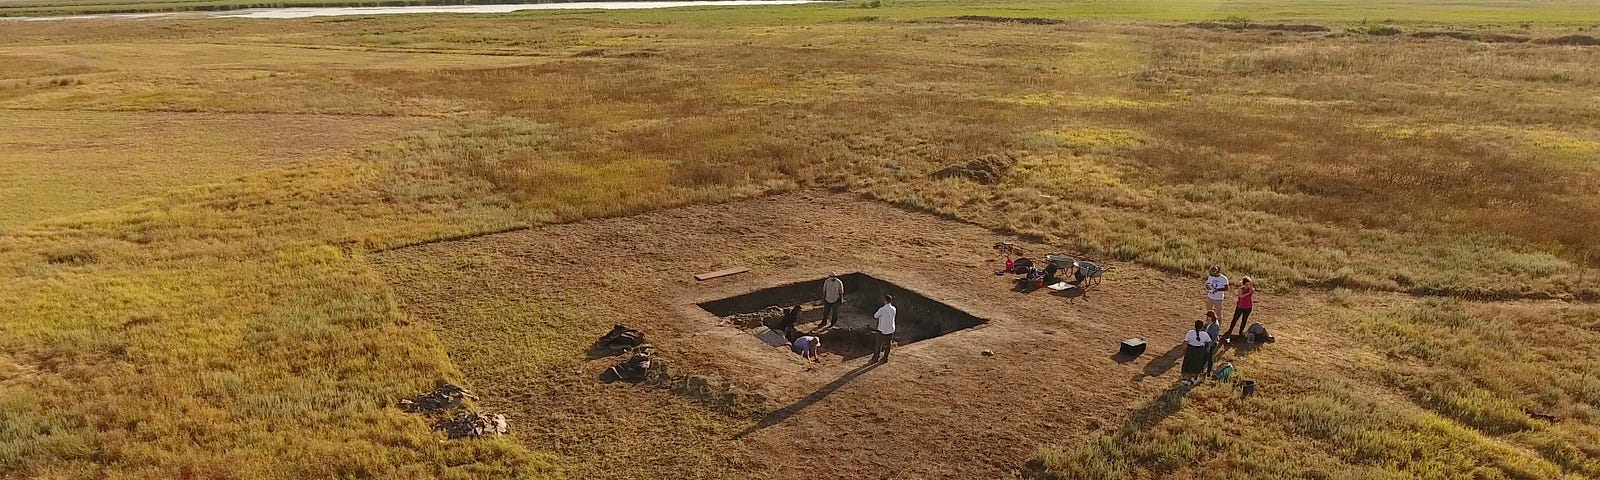 UT archaeologists excavate a field in Romania that was once the site of the ancient Histria civilization.